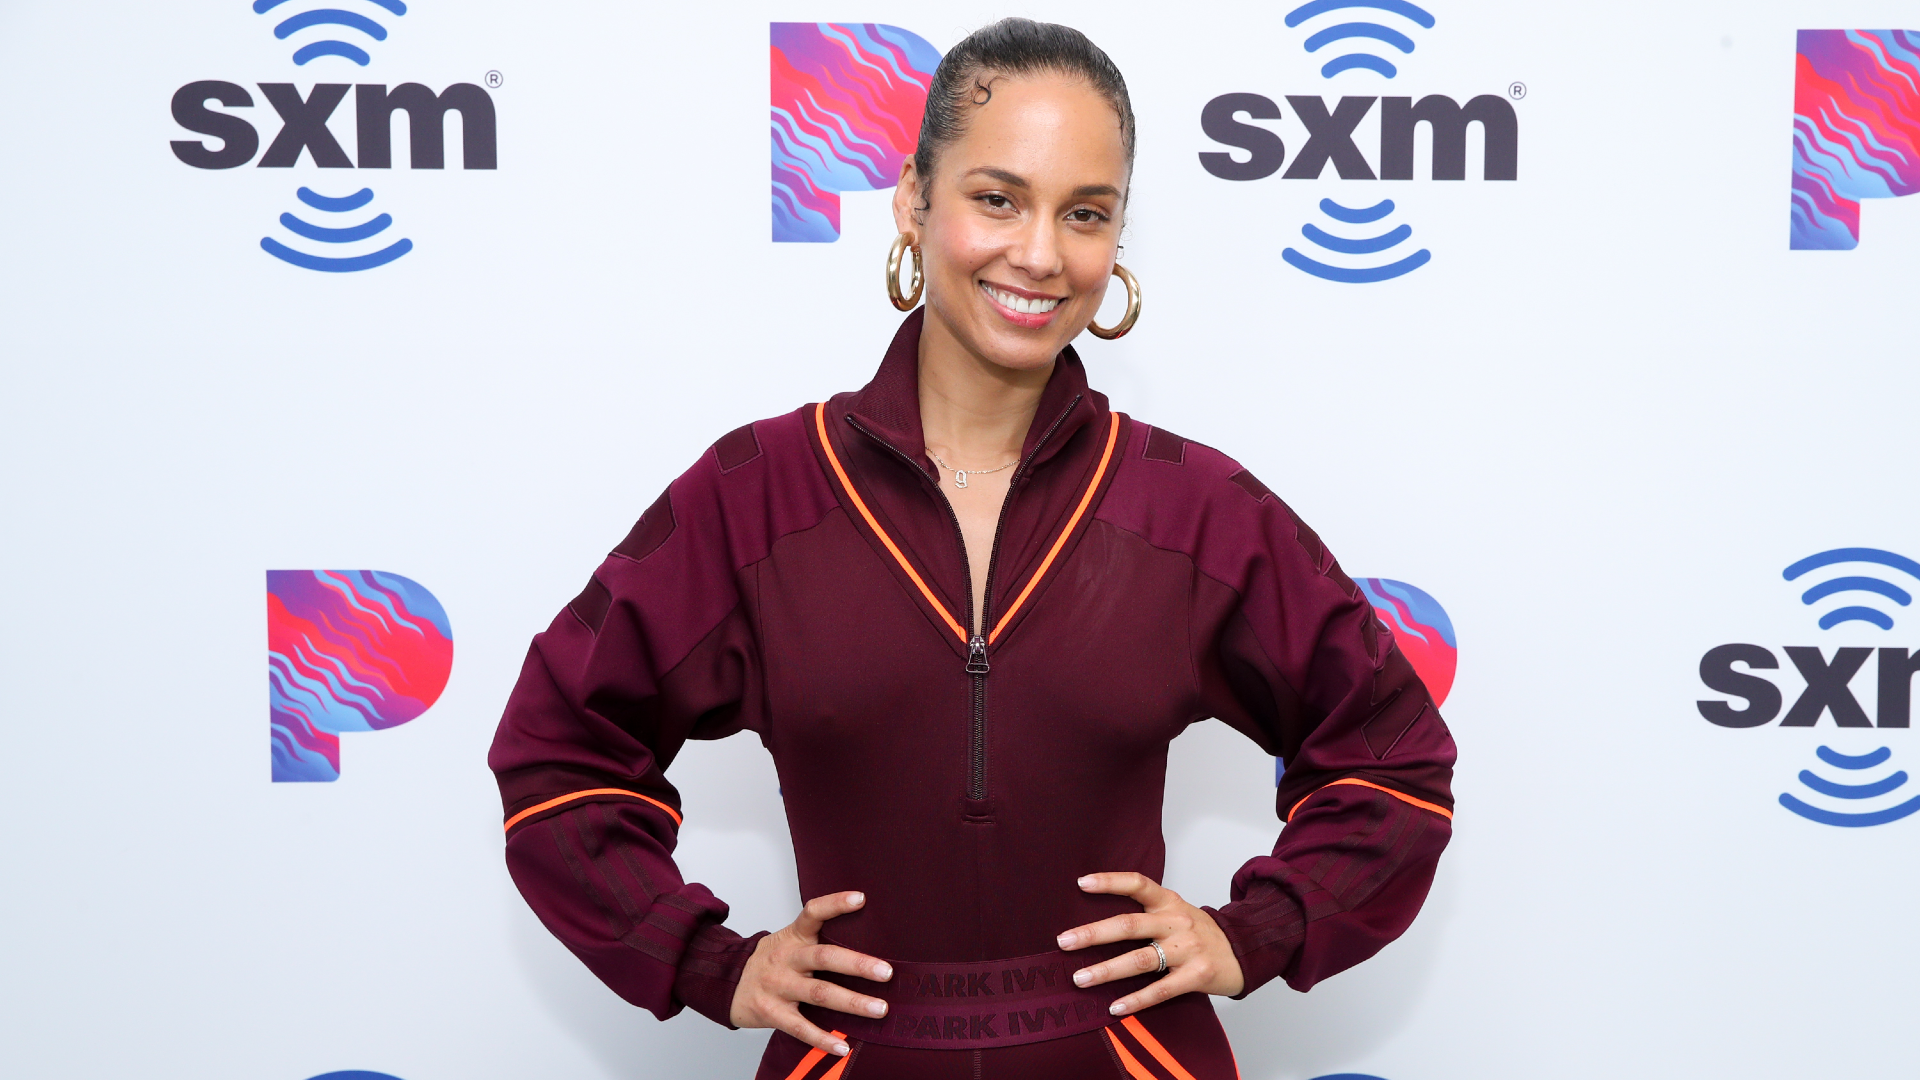 How To Get Alicia Keys’s Rope Twists From “So Done” Music Video